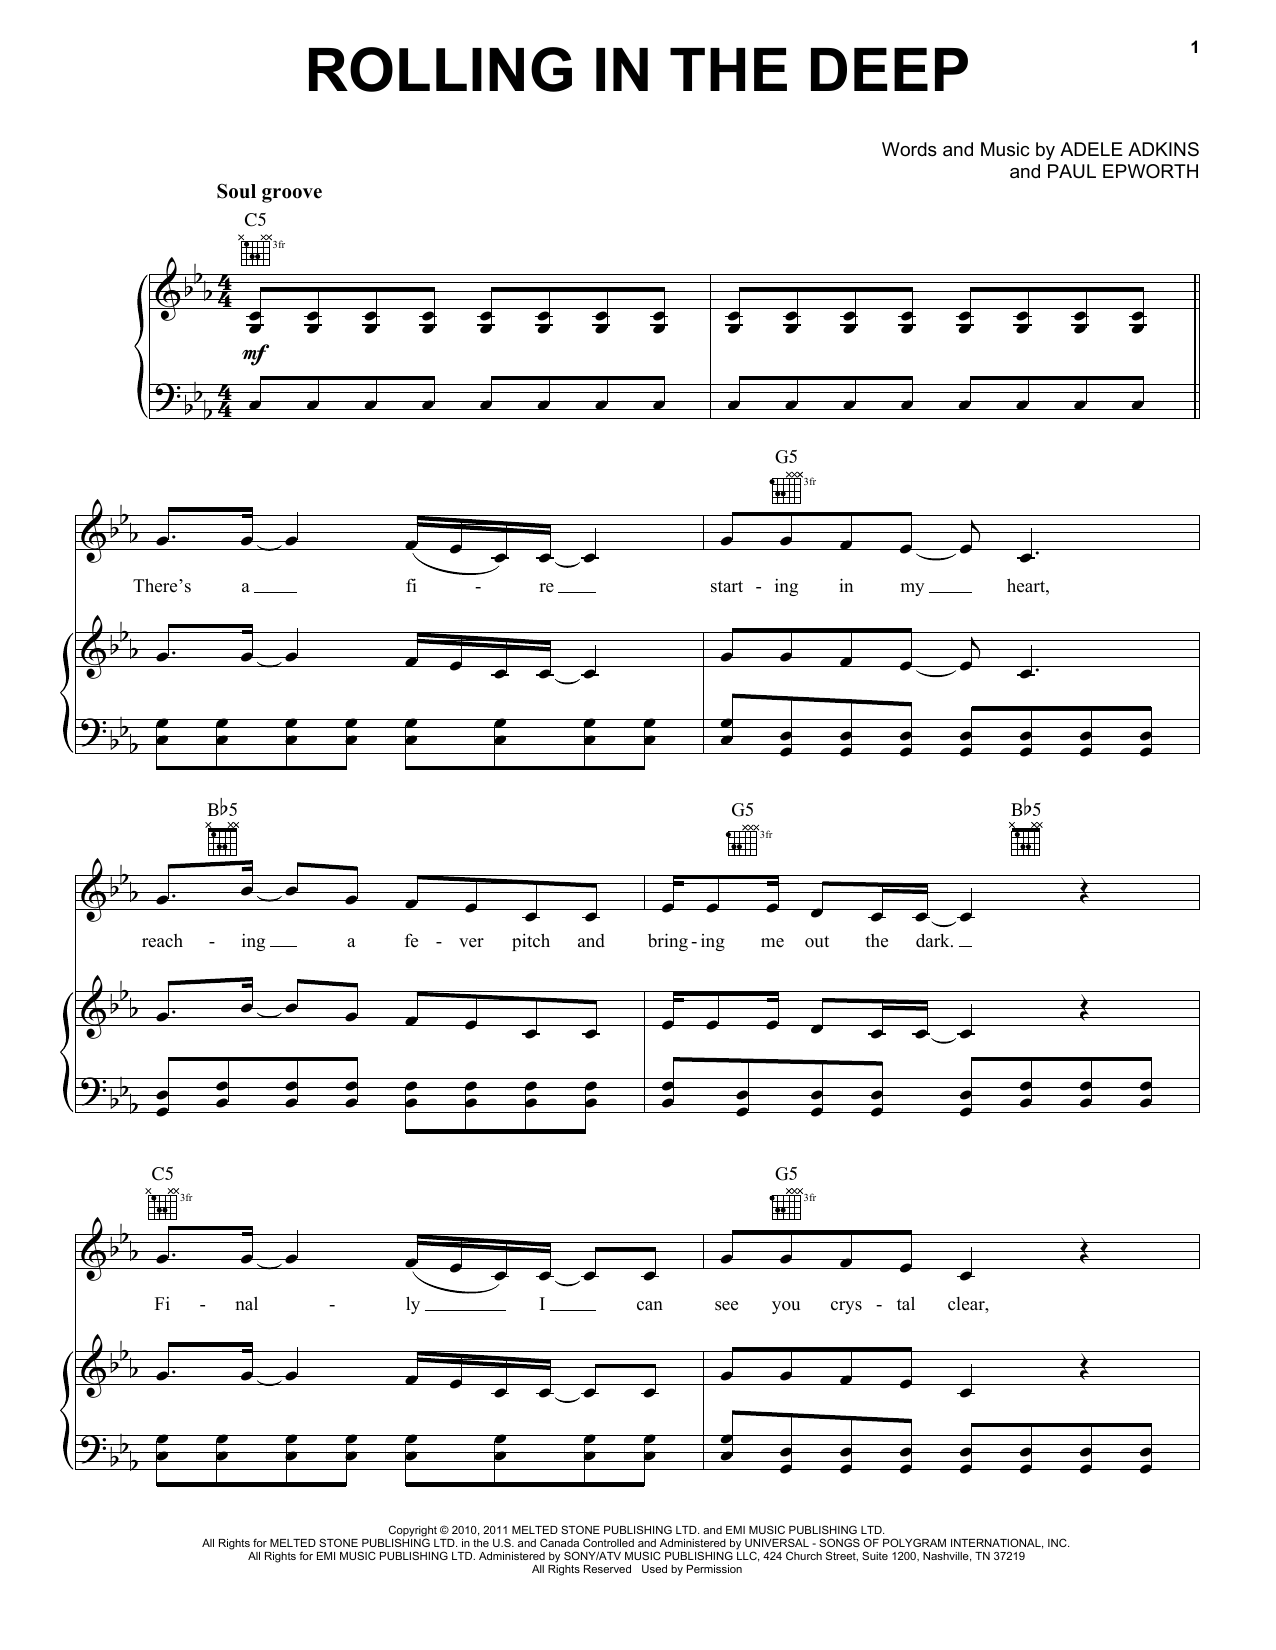 Adele "Rolling In The Deep" Sheet Music PDF Notes, Chords | Blues Score  Piano Solo Download Printable. SKU: 156966